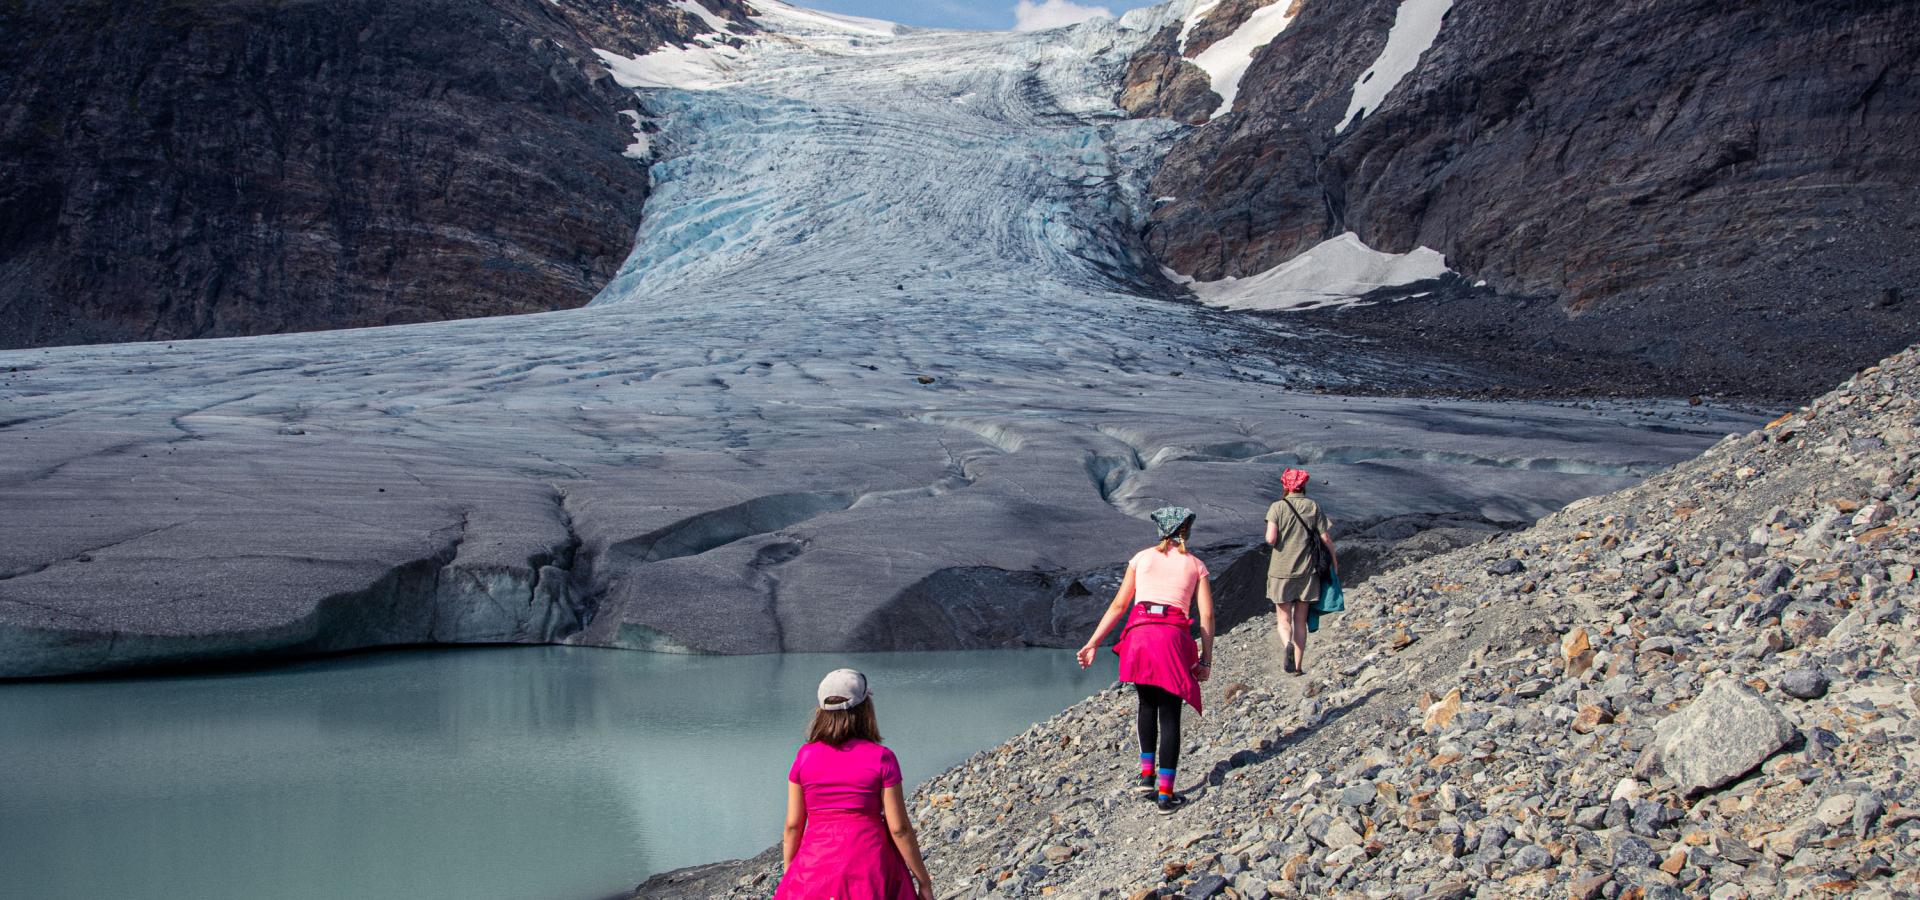 3 persons walking towards the glacier on a rocky ground